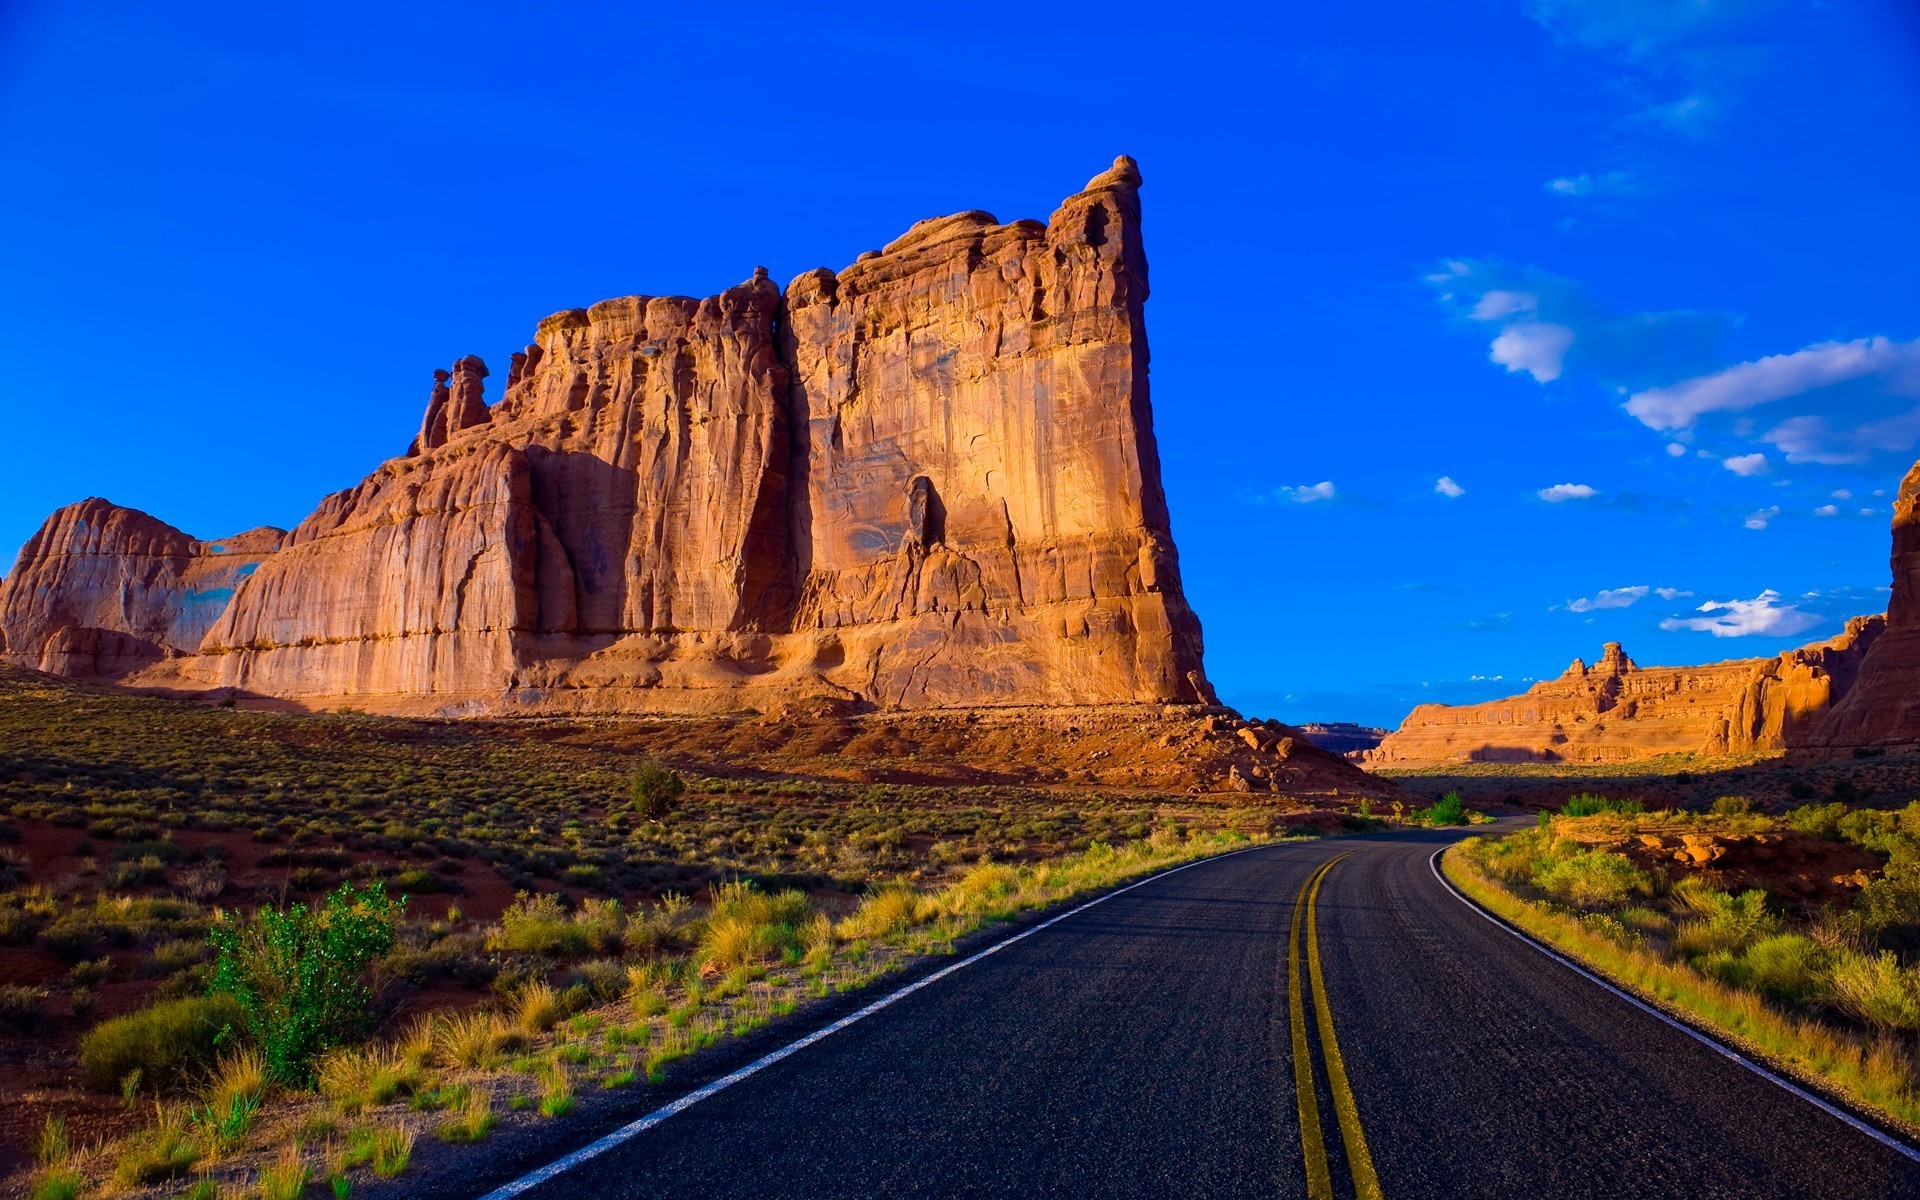 famous places travel outdoors desert rock sandstone sky landscape nature scenic canyon mountain valley geology sunset remote road arid daylight